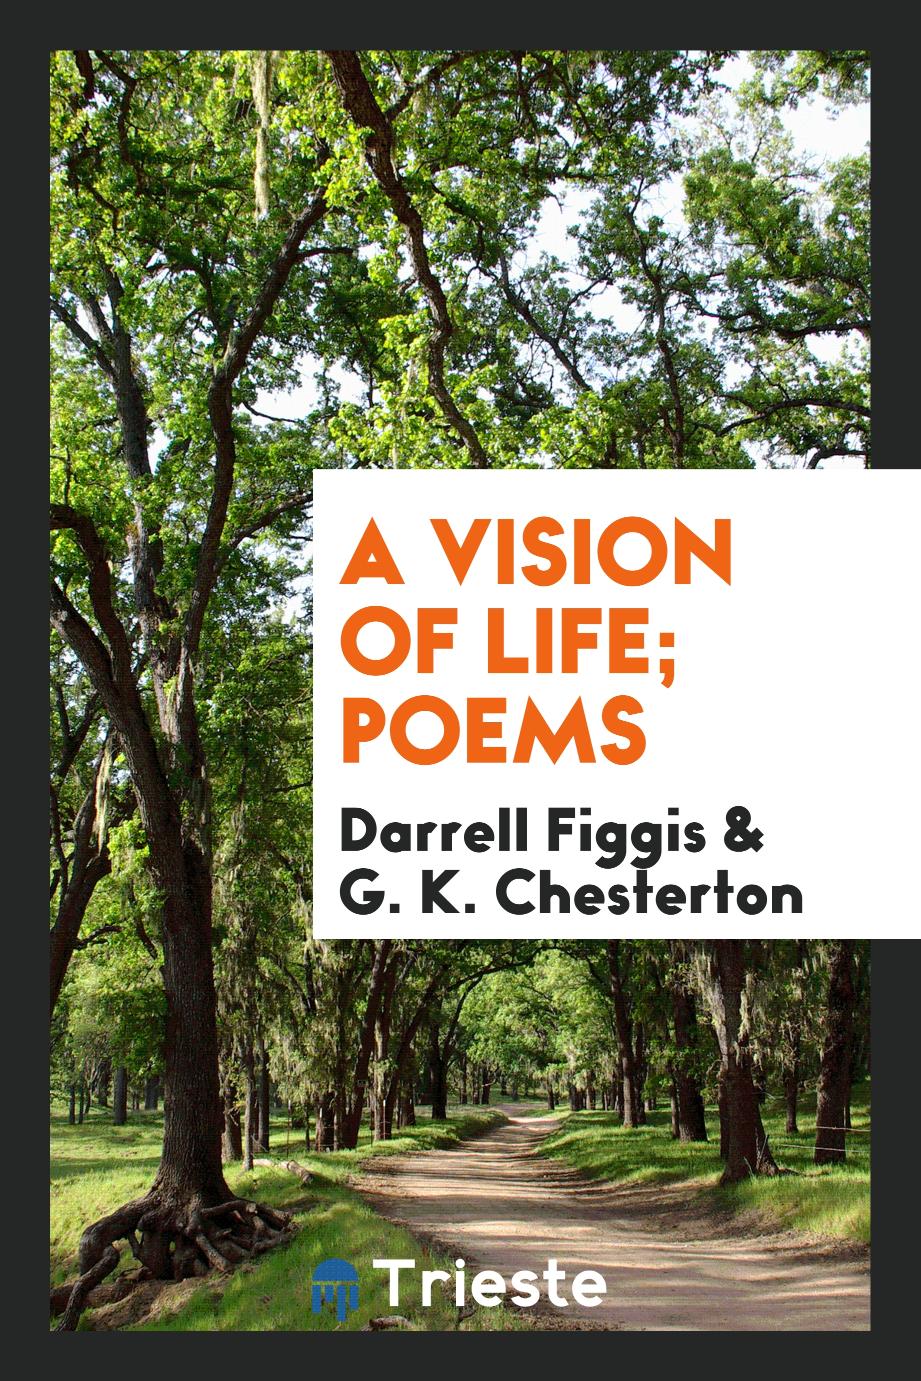 A vision of life; poems